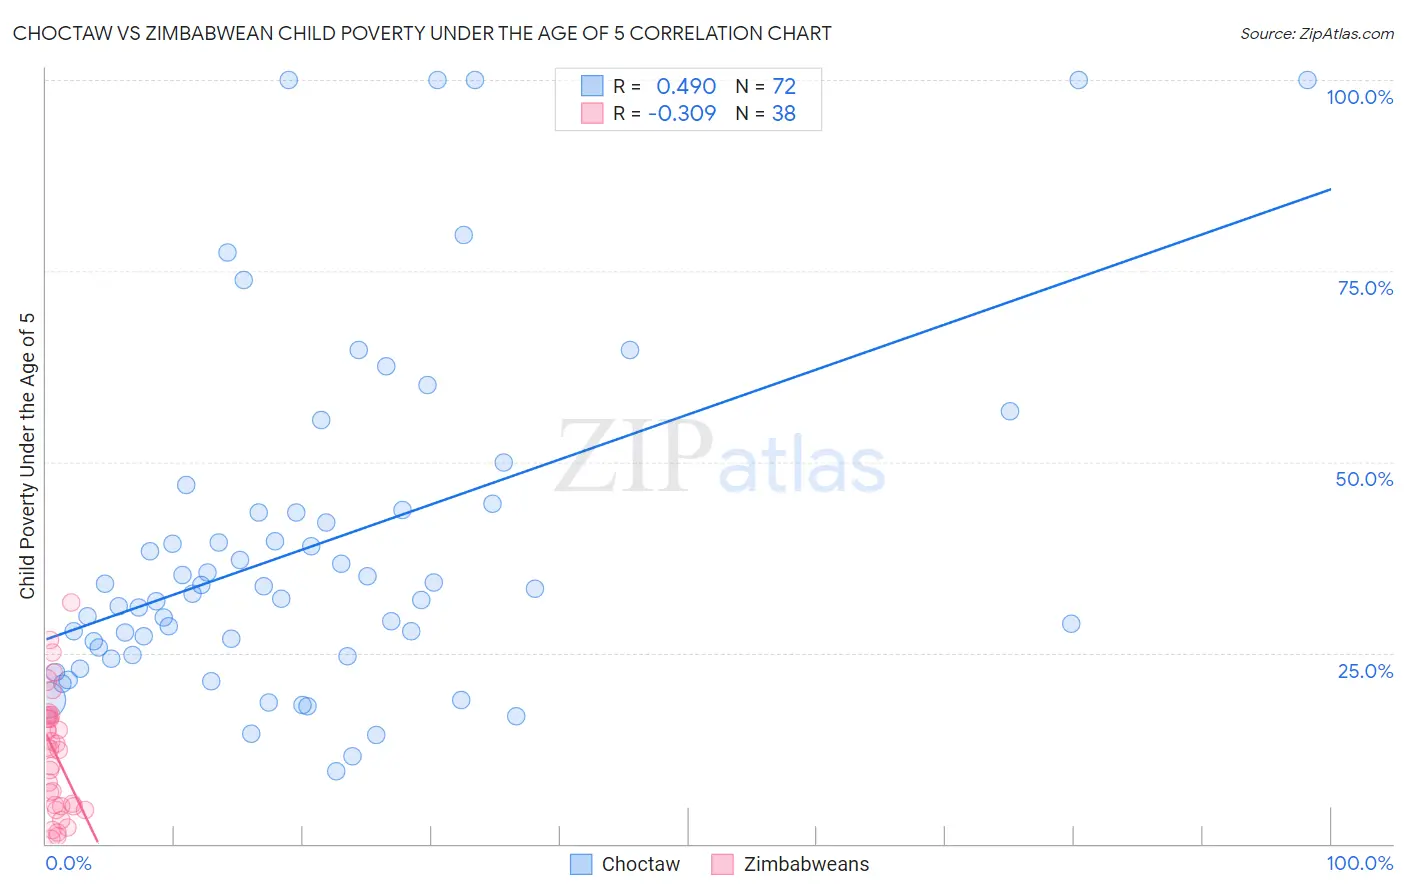 Choctaw vs Zimbabwean Child Poverty Under the Age of 5